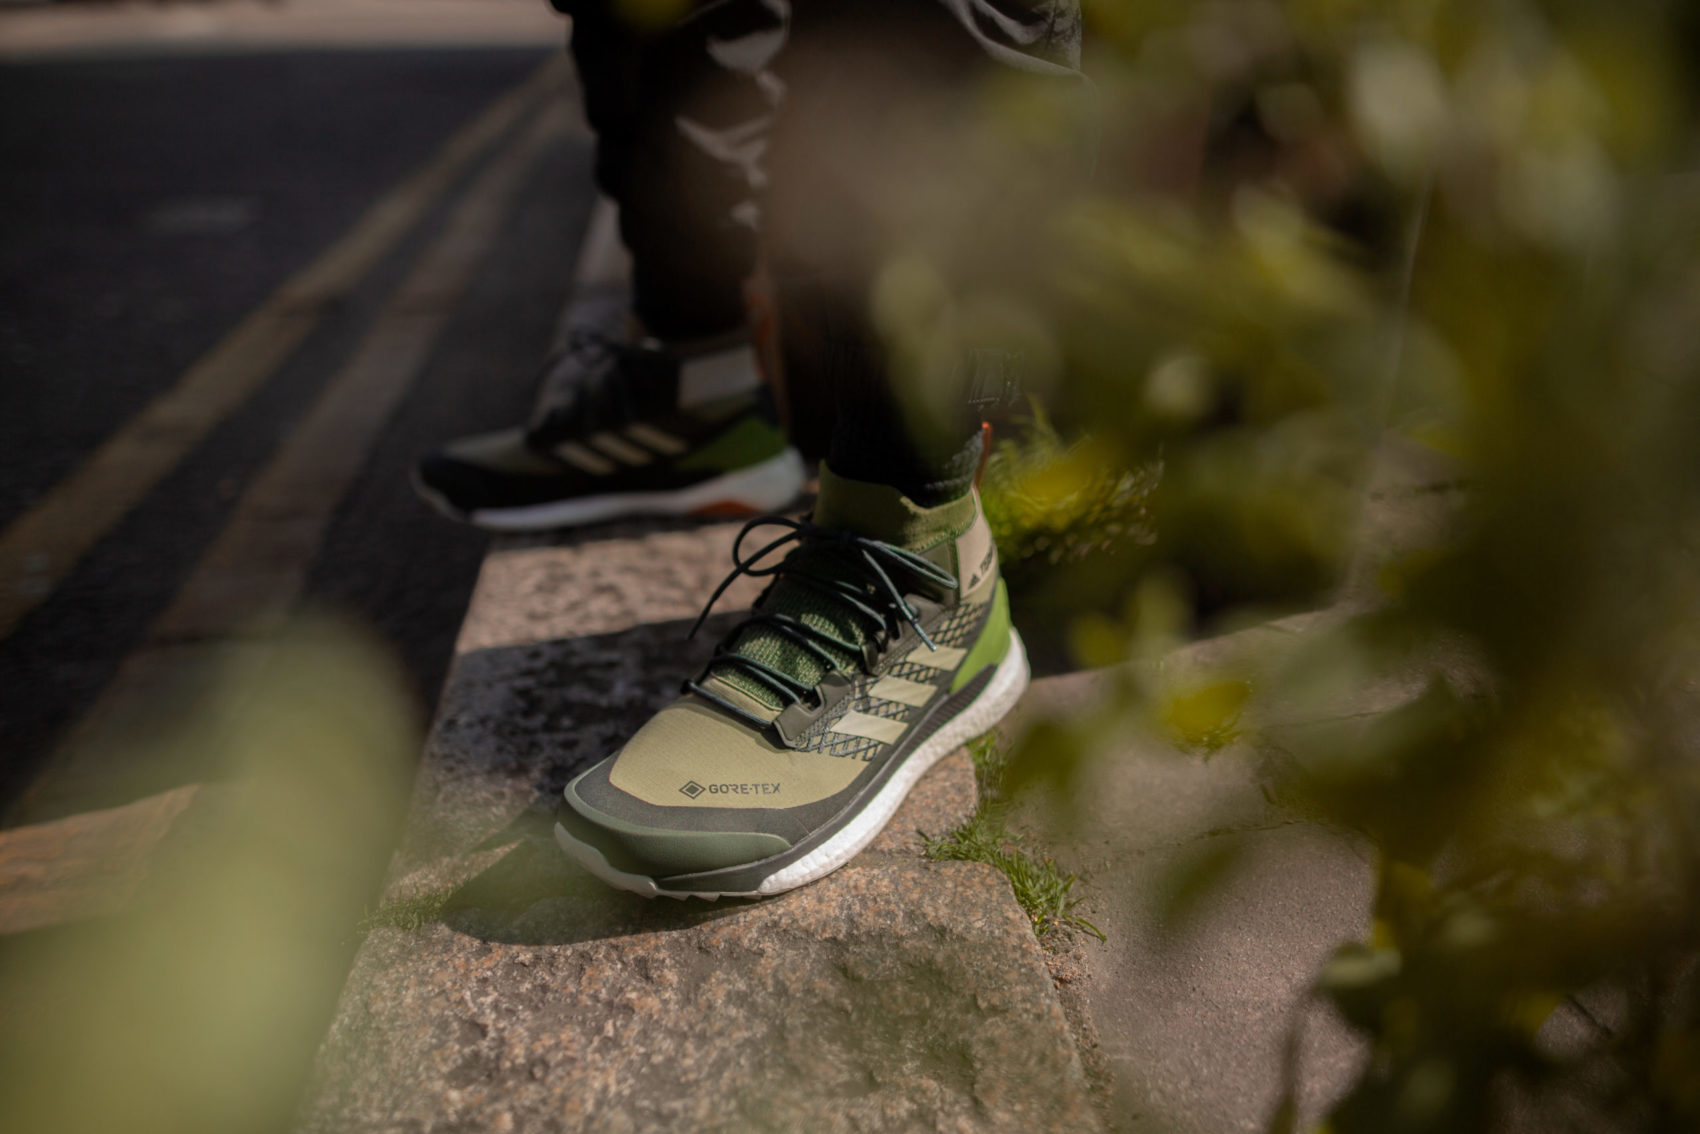 A creative promotional photo taken by I Heart Studios showcasing the detail of a man's leg wearing a pair of sneakers.